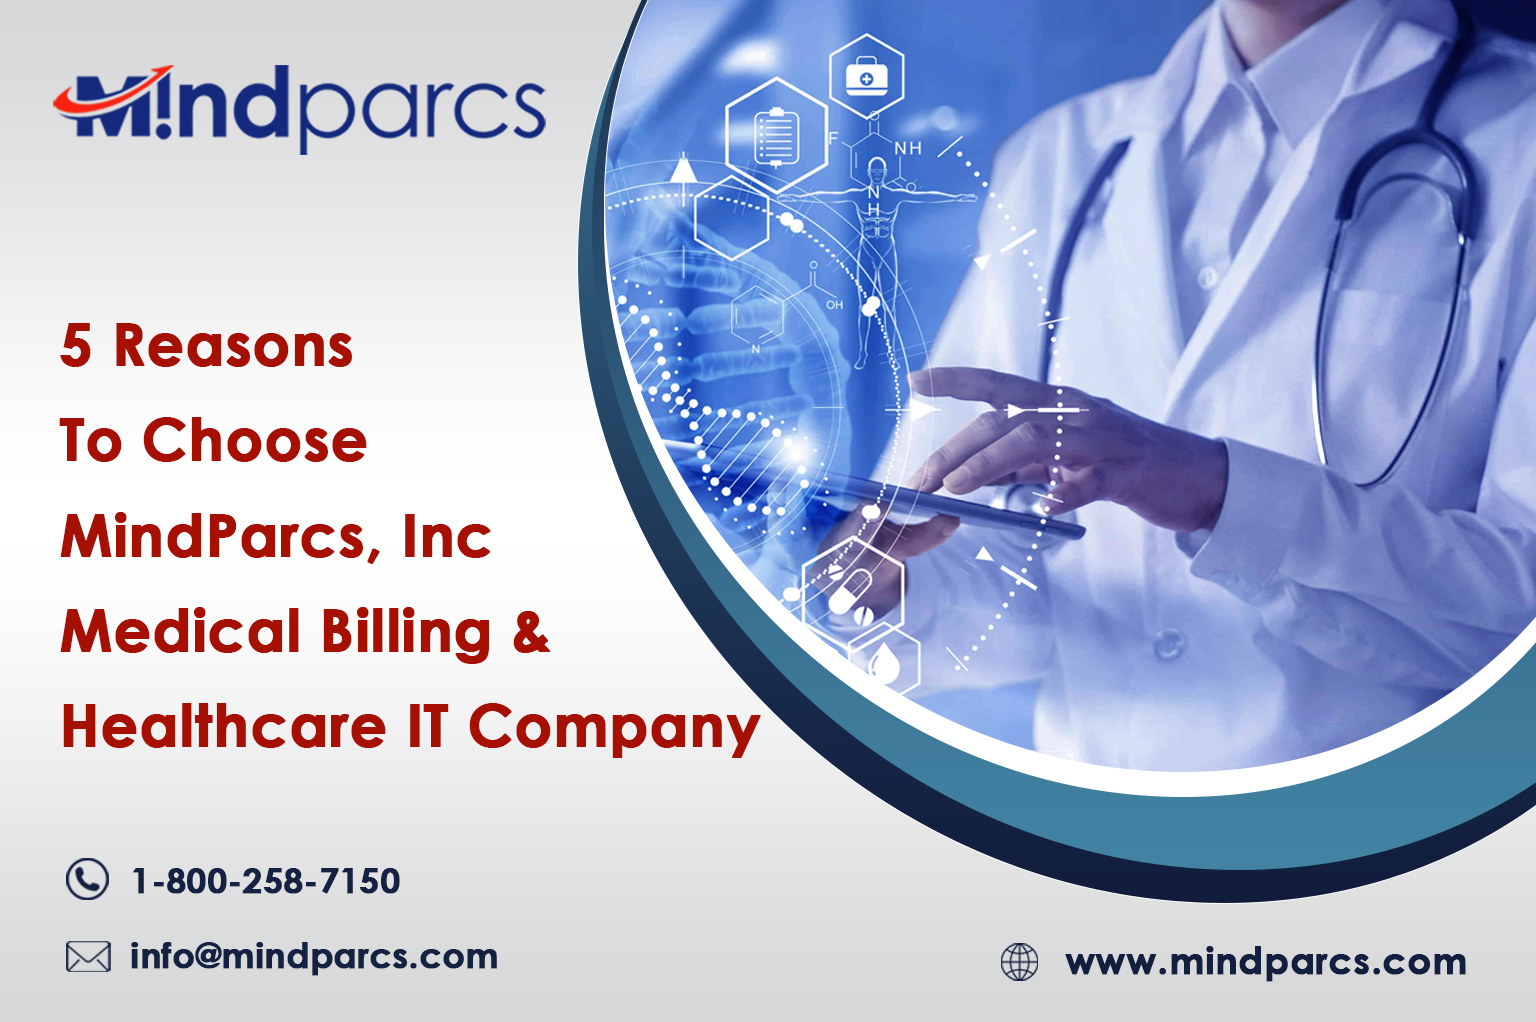 5 Reasons to Choose MindParcs, Inc Medical Billing and Healthcare IT Company